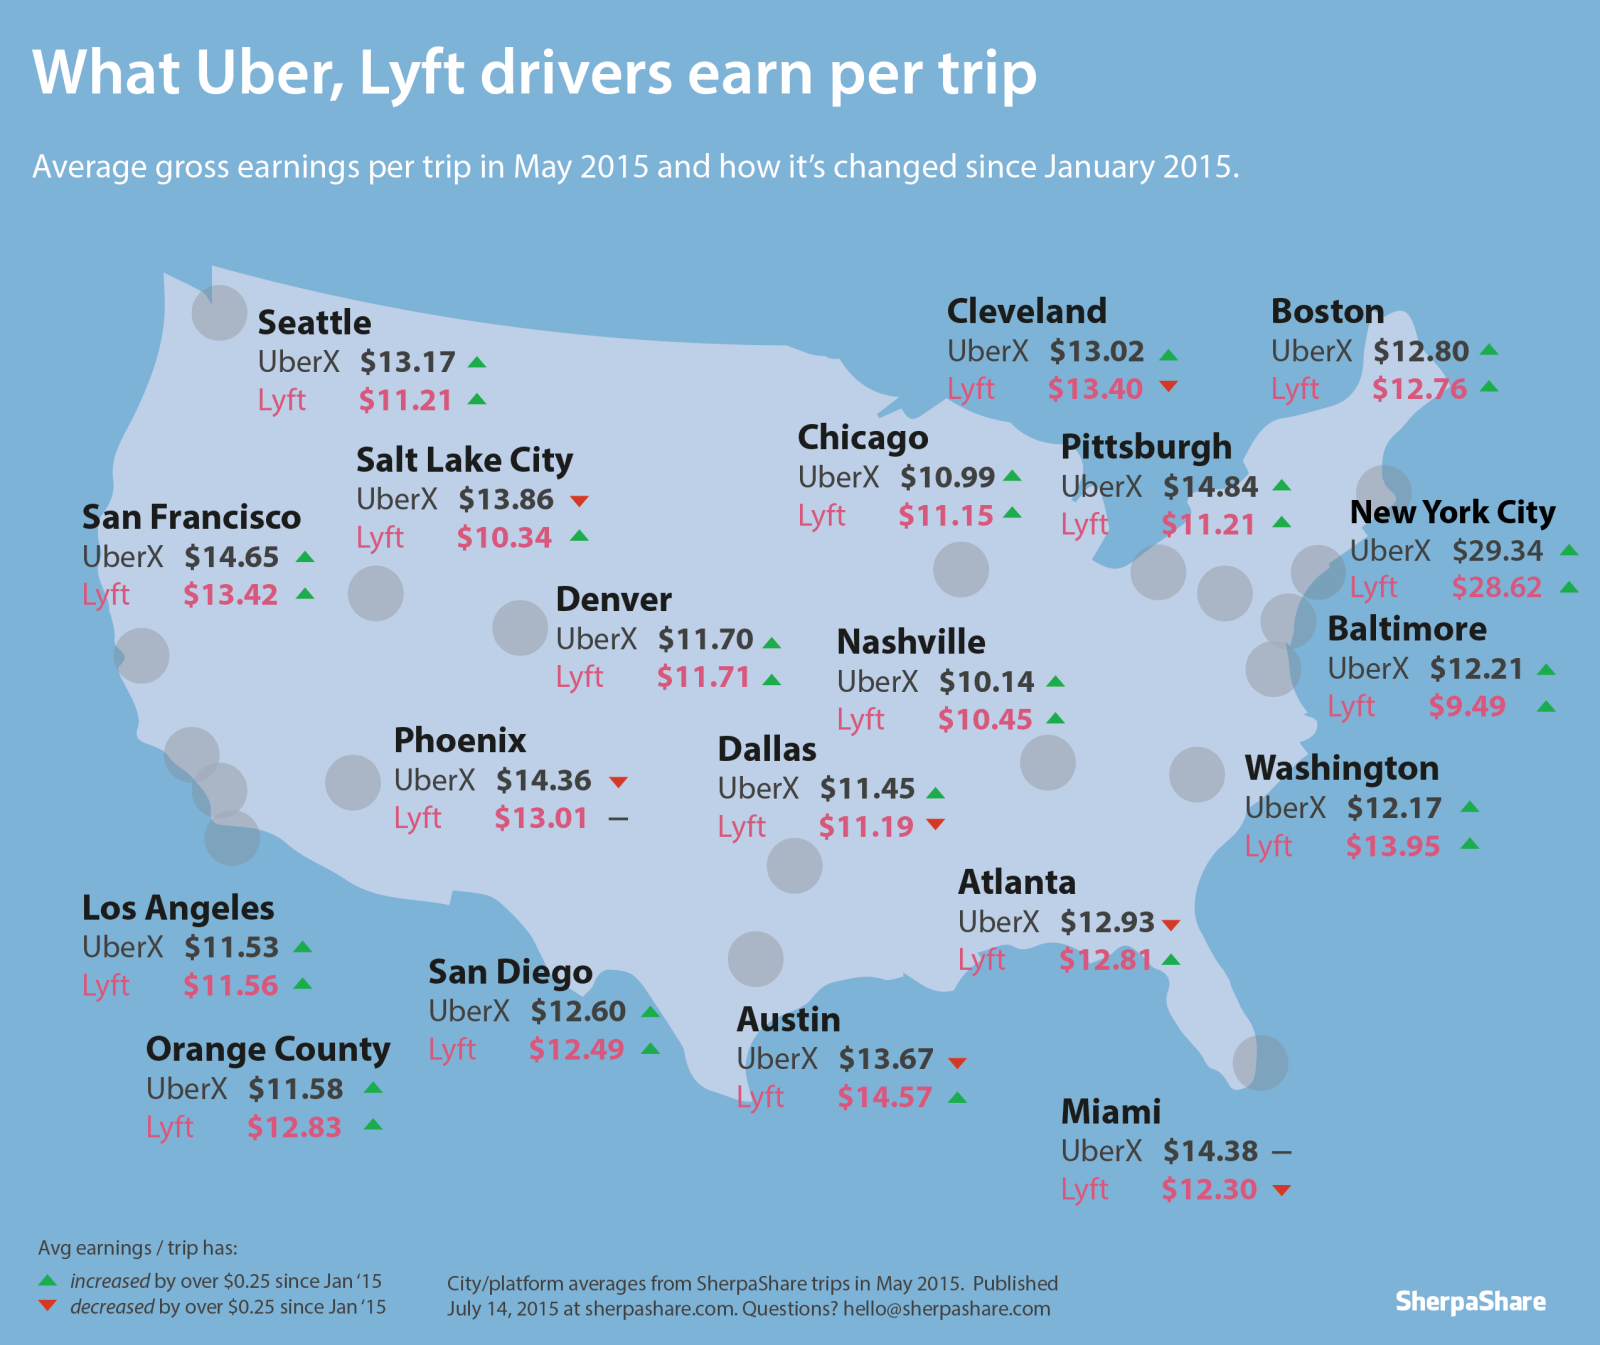 Here's How Much the Average Ride Costs on Uber and Lyft